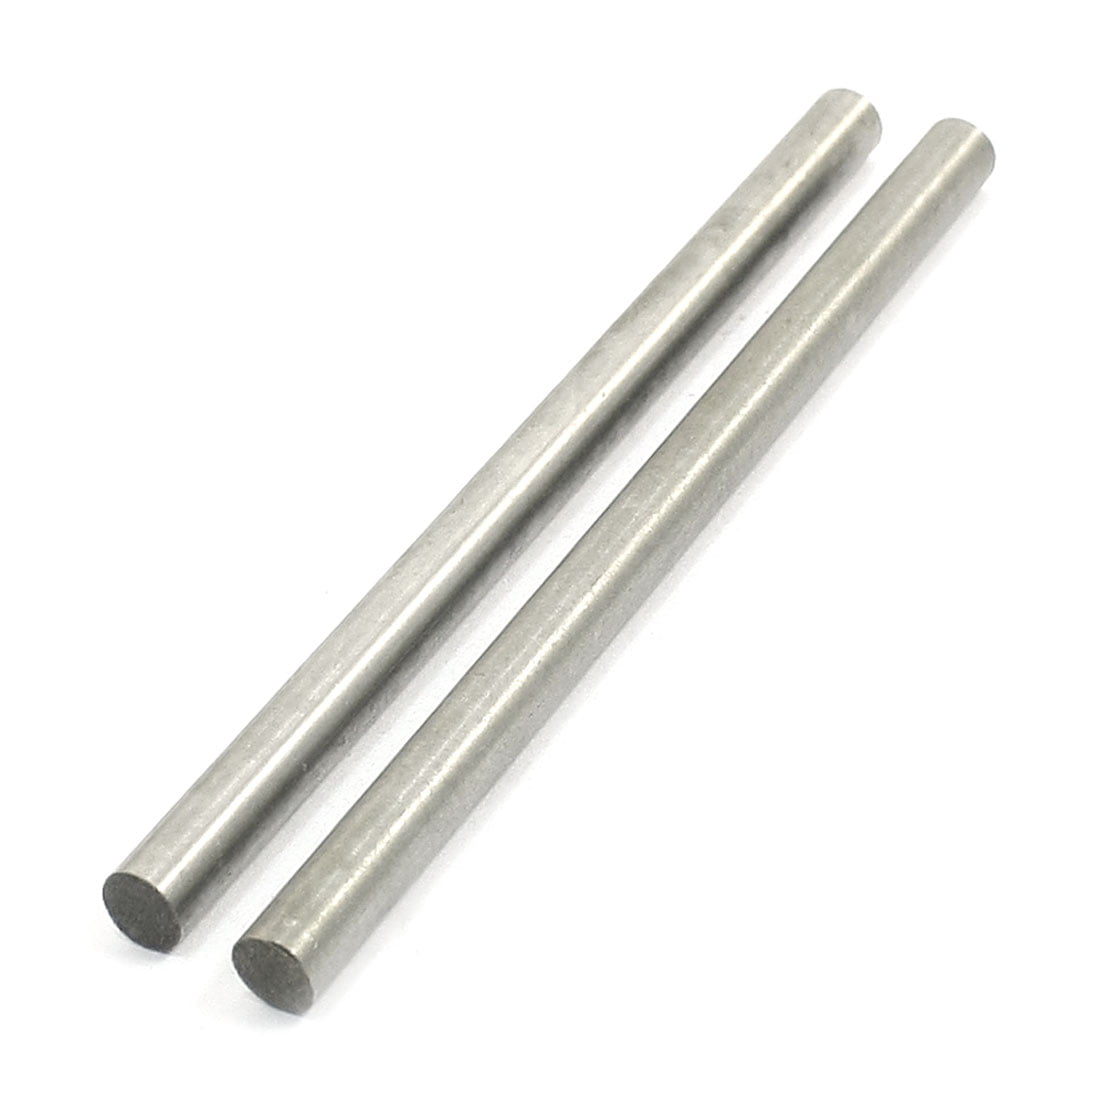 uxcell Stainless Steel Round Shaft Rod Axle 3mm x 90mm for RC Toy Car 